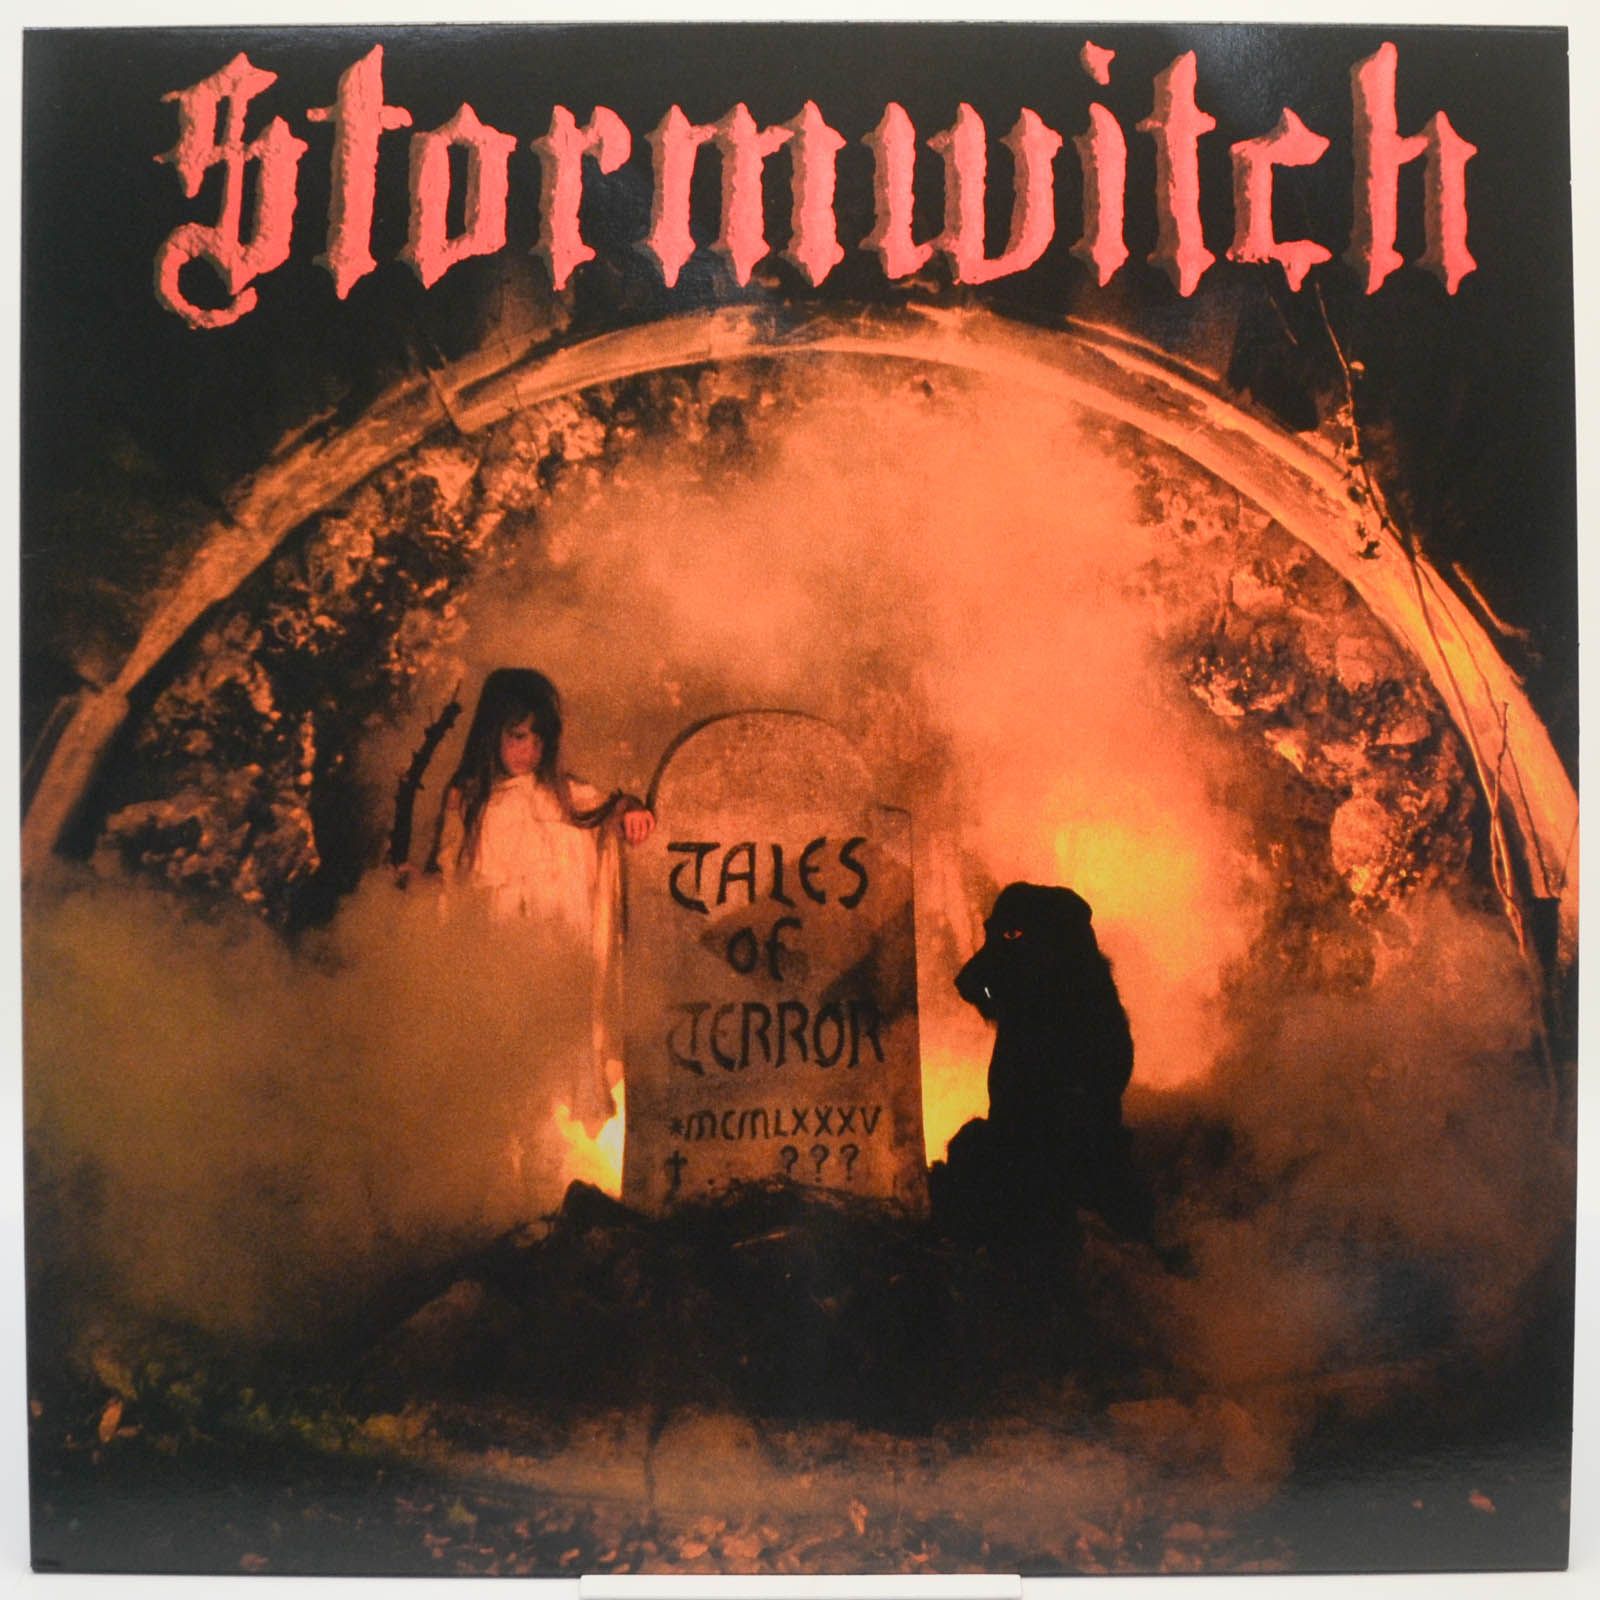 Stormwitch — Tales Of Terror, 1985